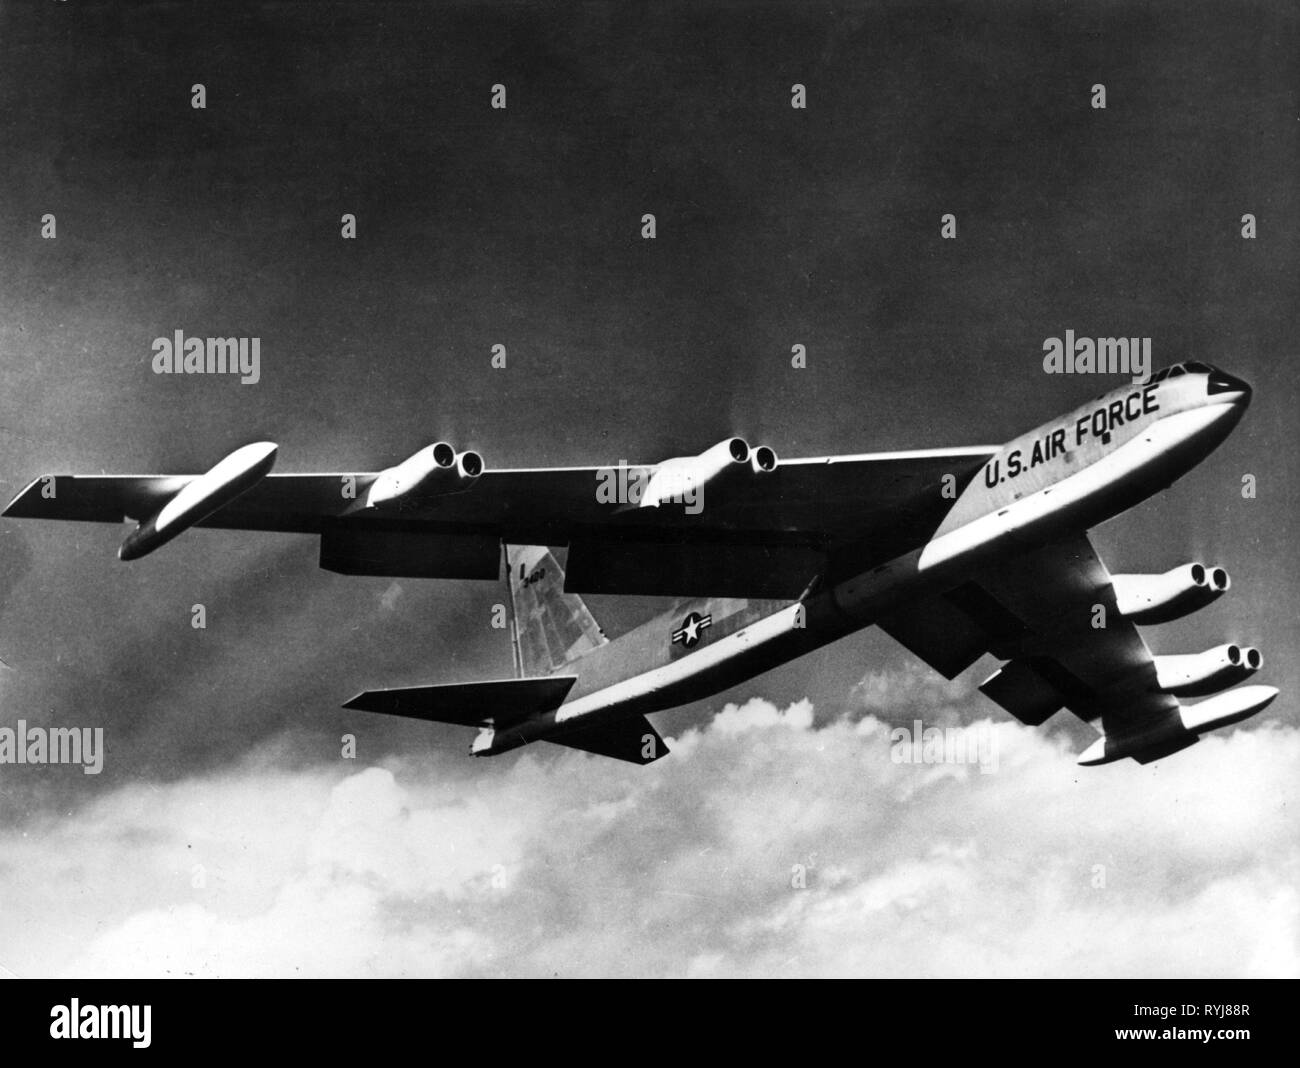 In aereo militare USA, Air Force, Strategic Air Command, bombardiere nucleare Boeing B-52 "tratofortress' nell'aria, anni cinquanta, Additional-Rights-Clearance-Info-Not-Available Foto Stock